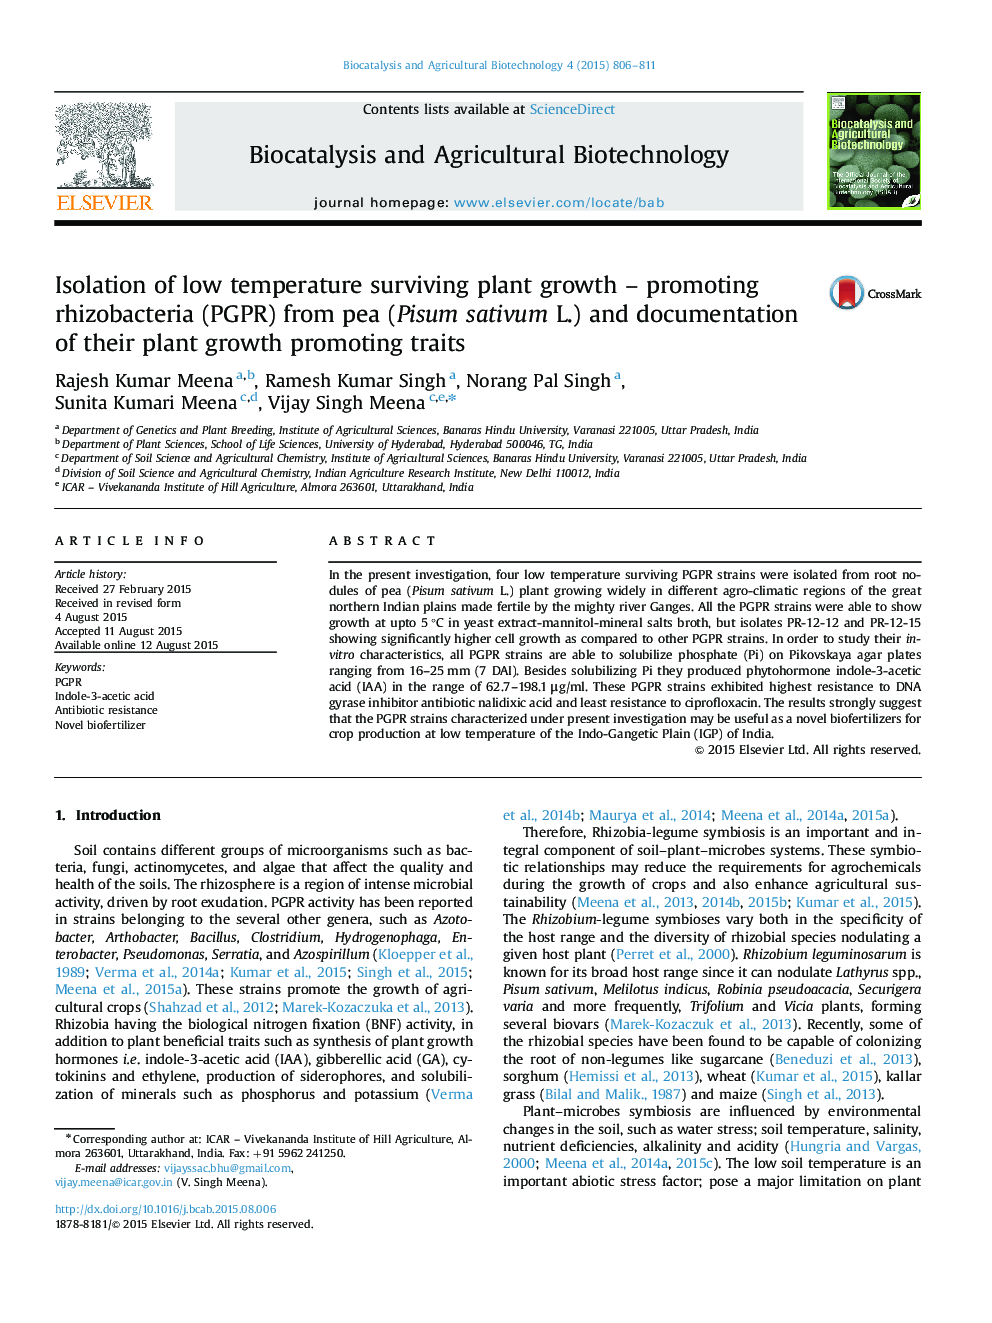 Isolation of low temperature surviving plant growth – promoting rhizobacteria (PGPR) from pea (Pisum sativum L.) and documentation of their plant growth promoting traits